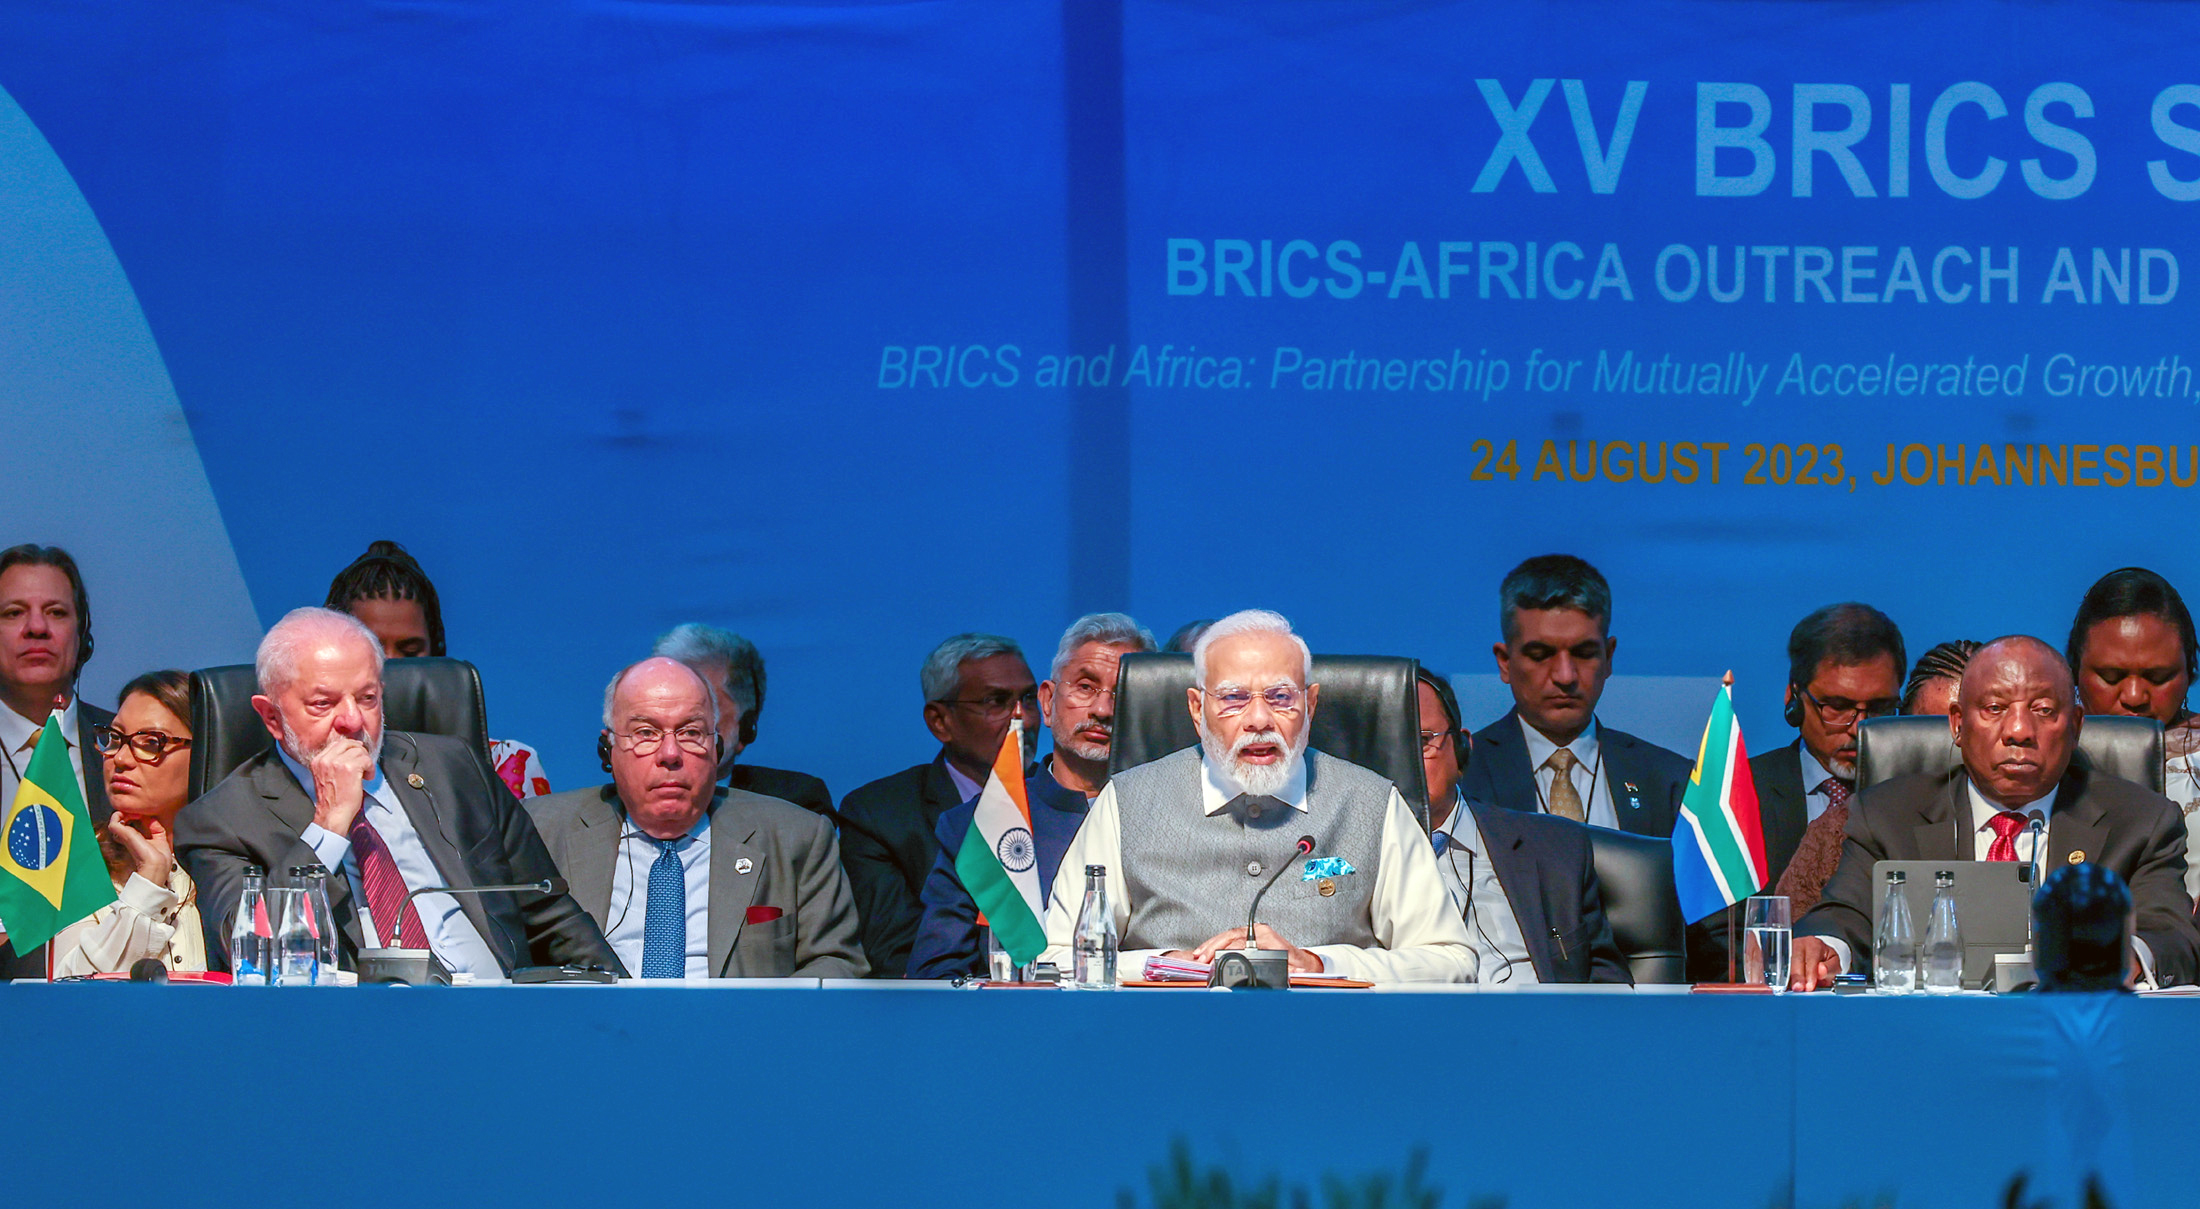 After BRICS expansion, group eyes reforms in UN Security Council and Bretton Woods system